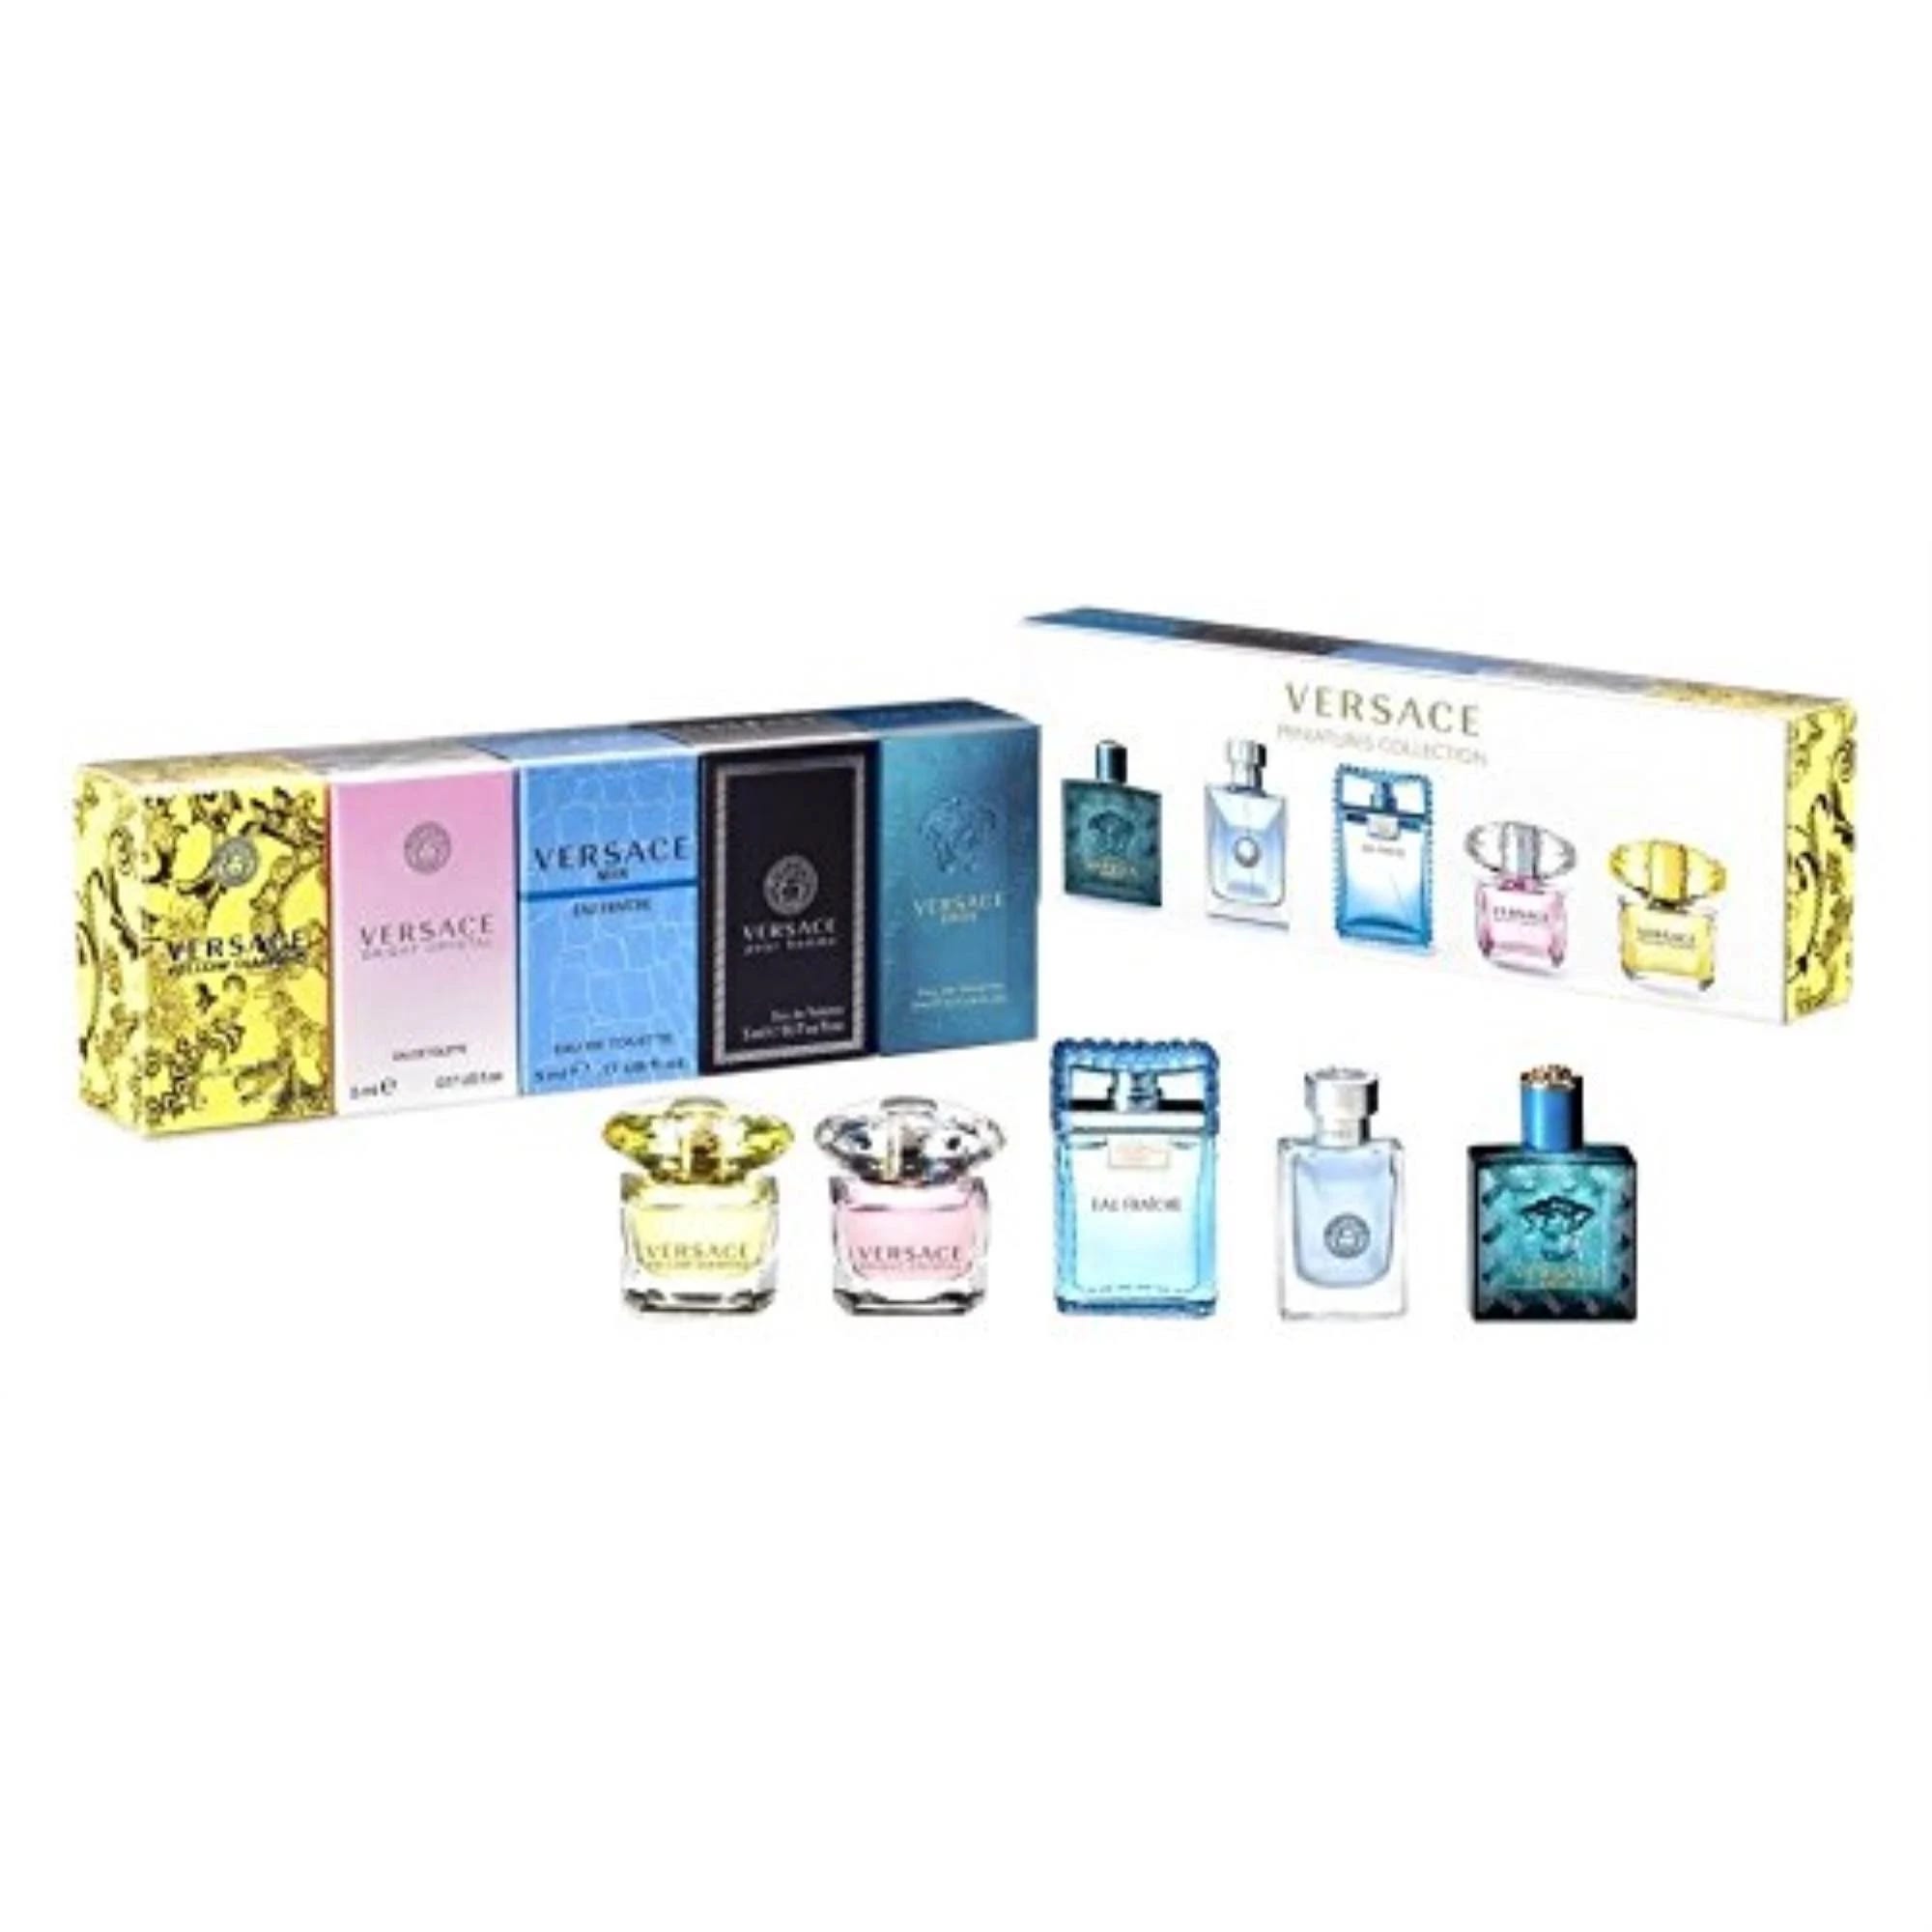 Versace Miniatures Collection Gift Set | Image